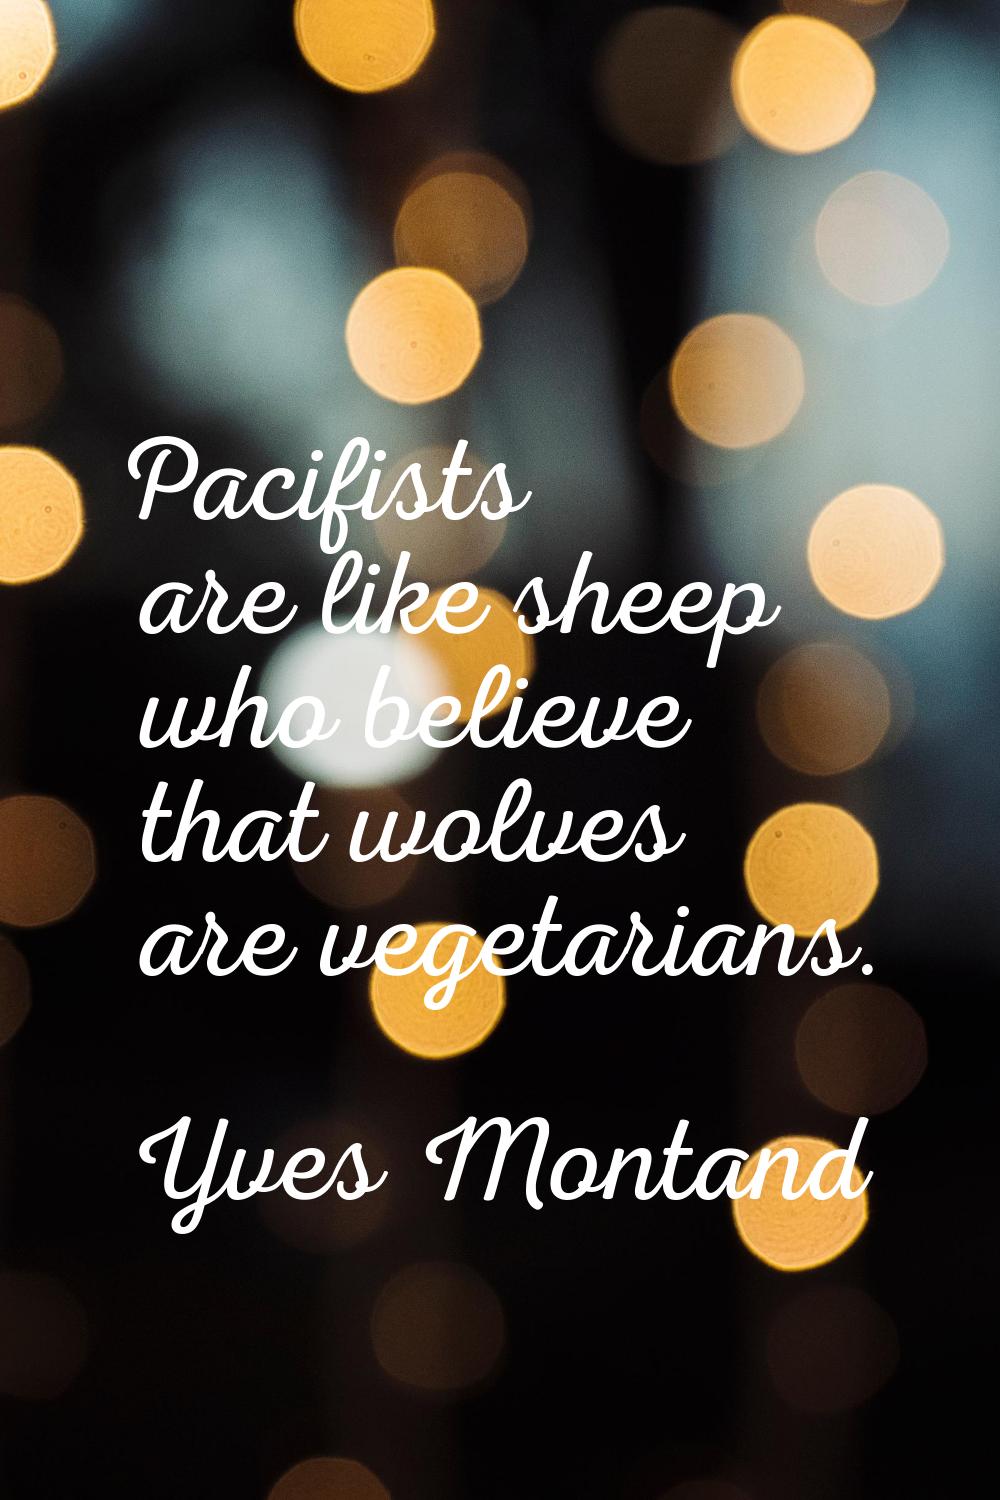 Pacifists are like sheep who believe that wolves are vegetarians.